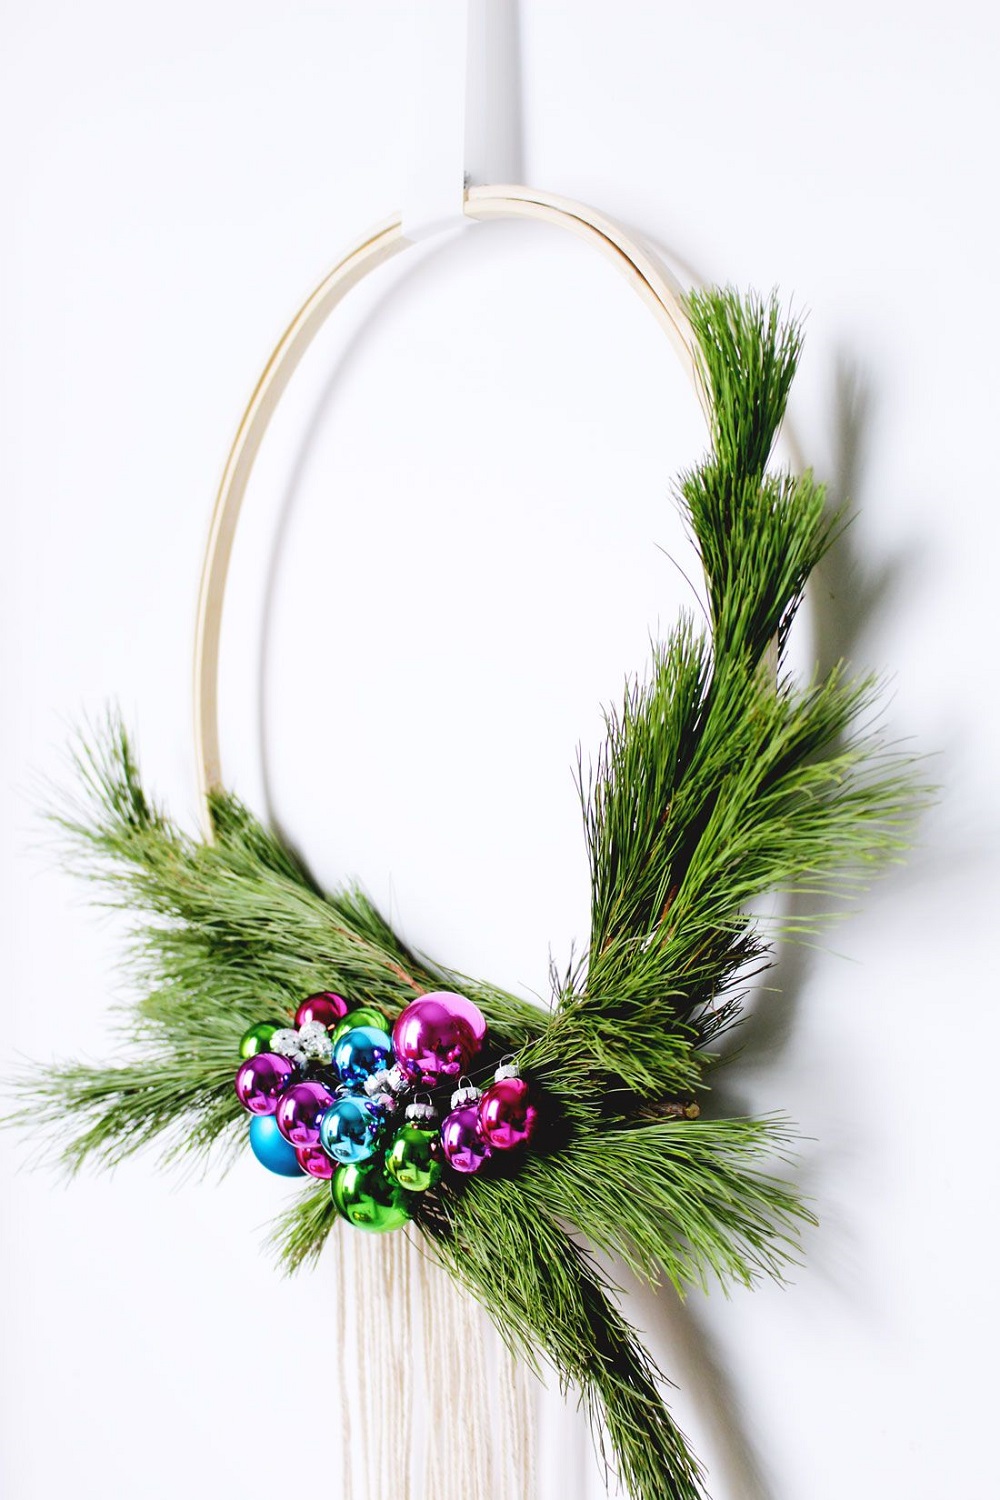 t3-81 Modern Christmas wreaths that you can decorate your home with